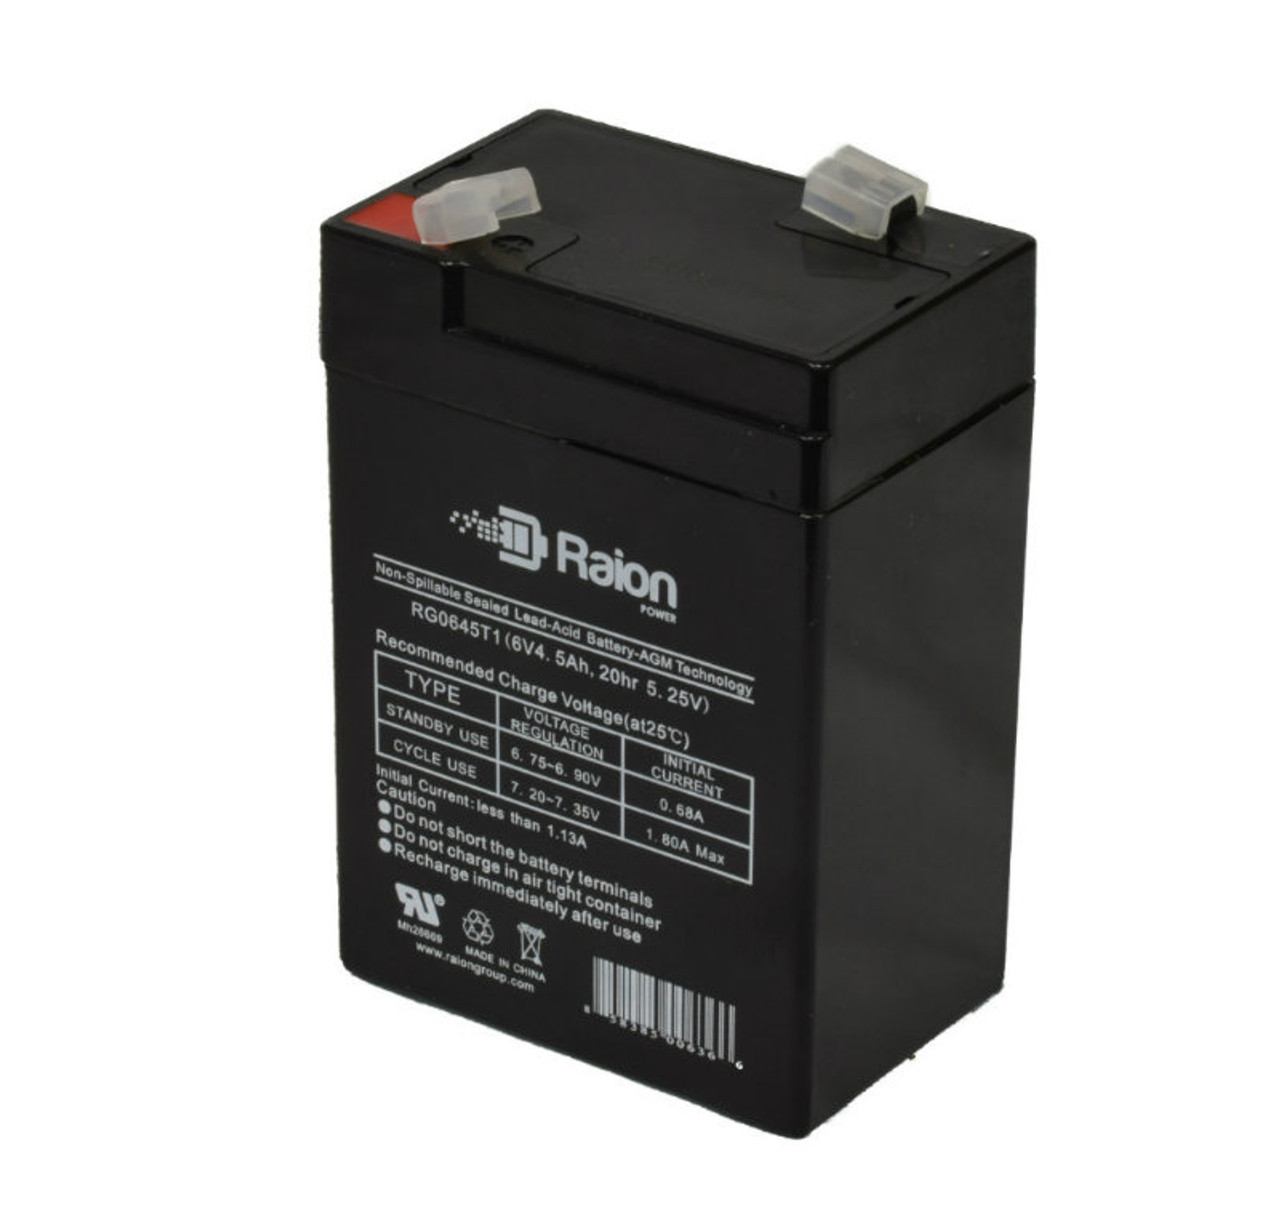 Raion Power RG0645T1 6V 4.5Ah Replacement Battery Cartridge for Genesis NP4-6